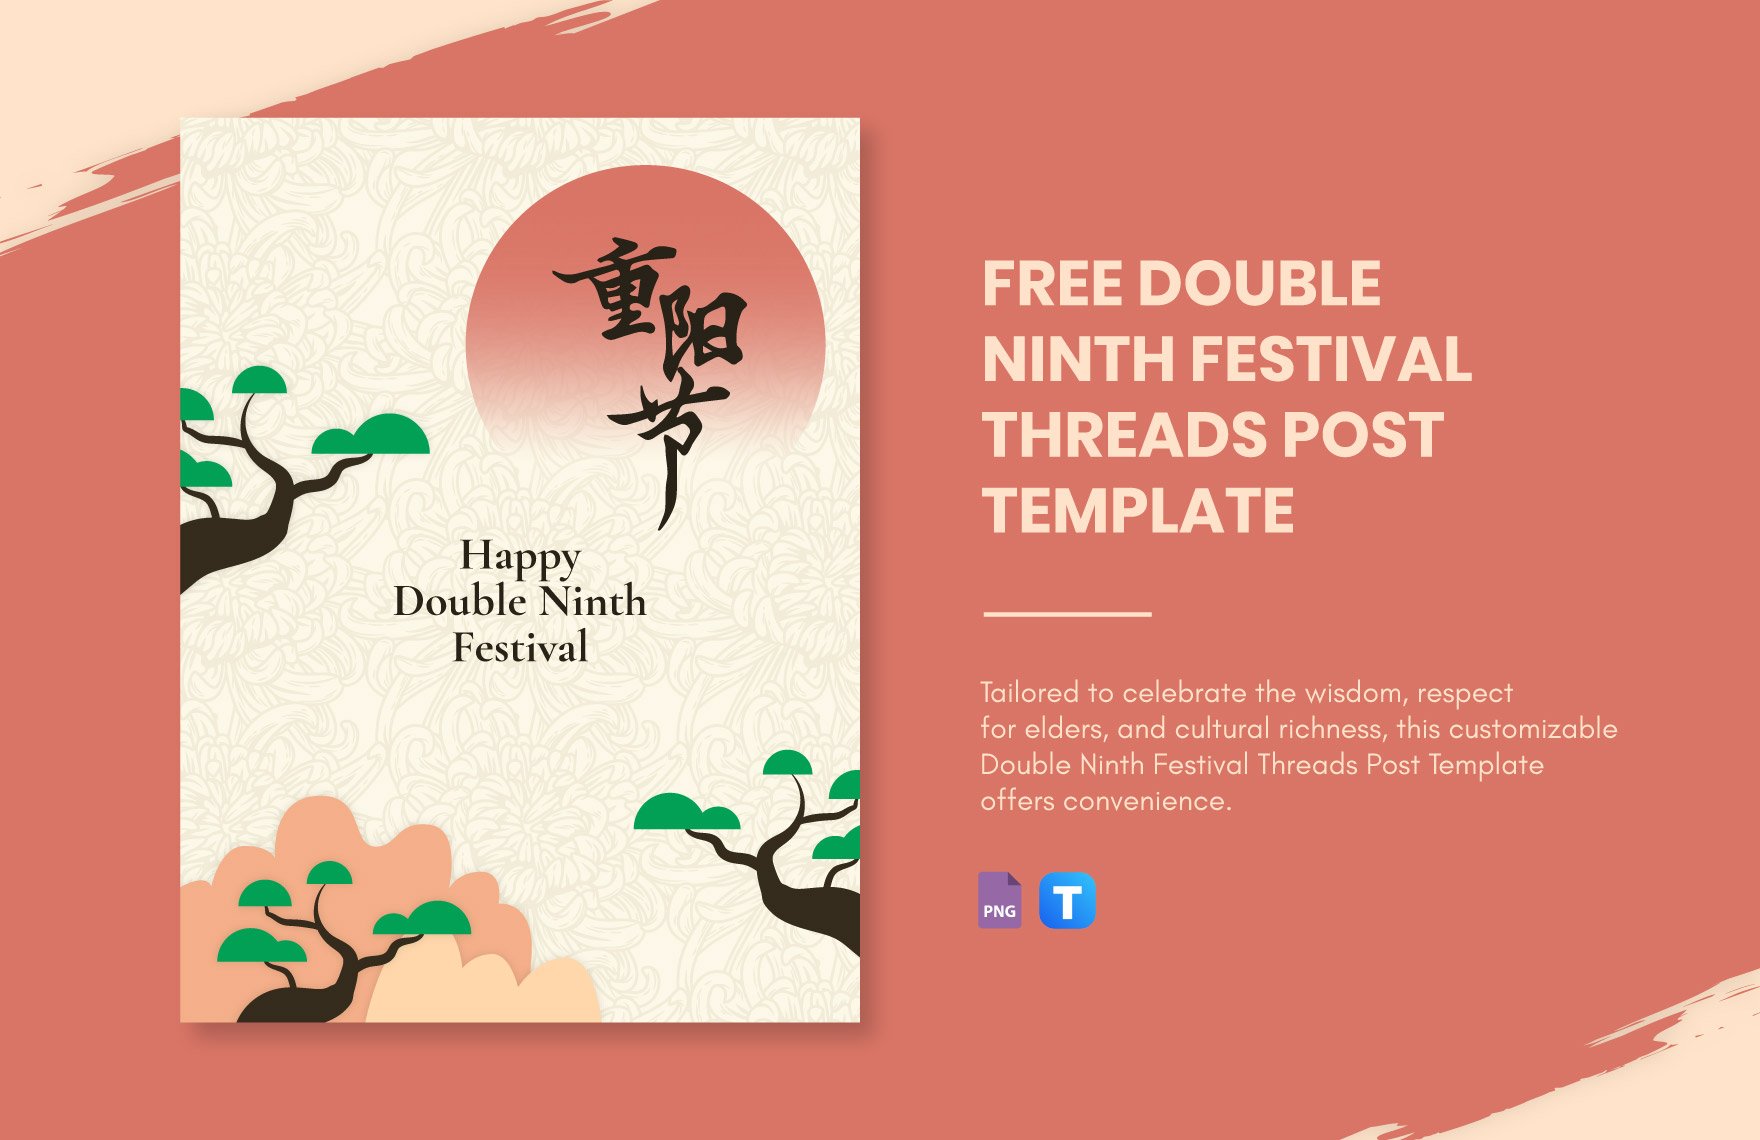 Free Double Ninth Festival Threads Post Template in PNG